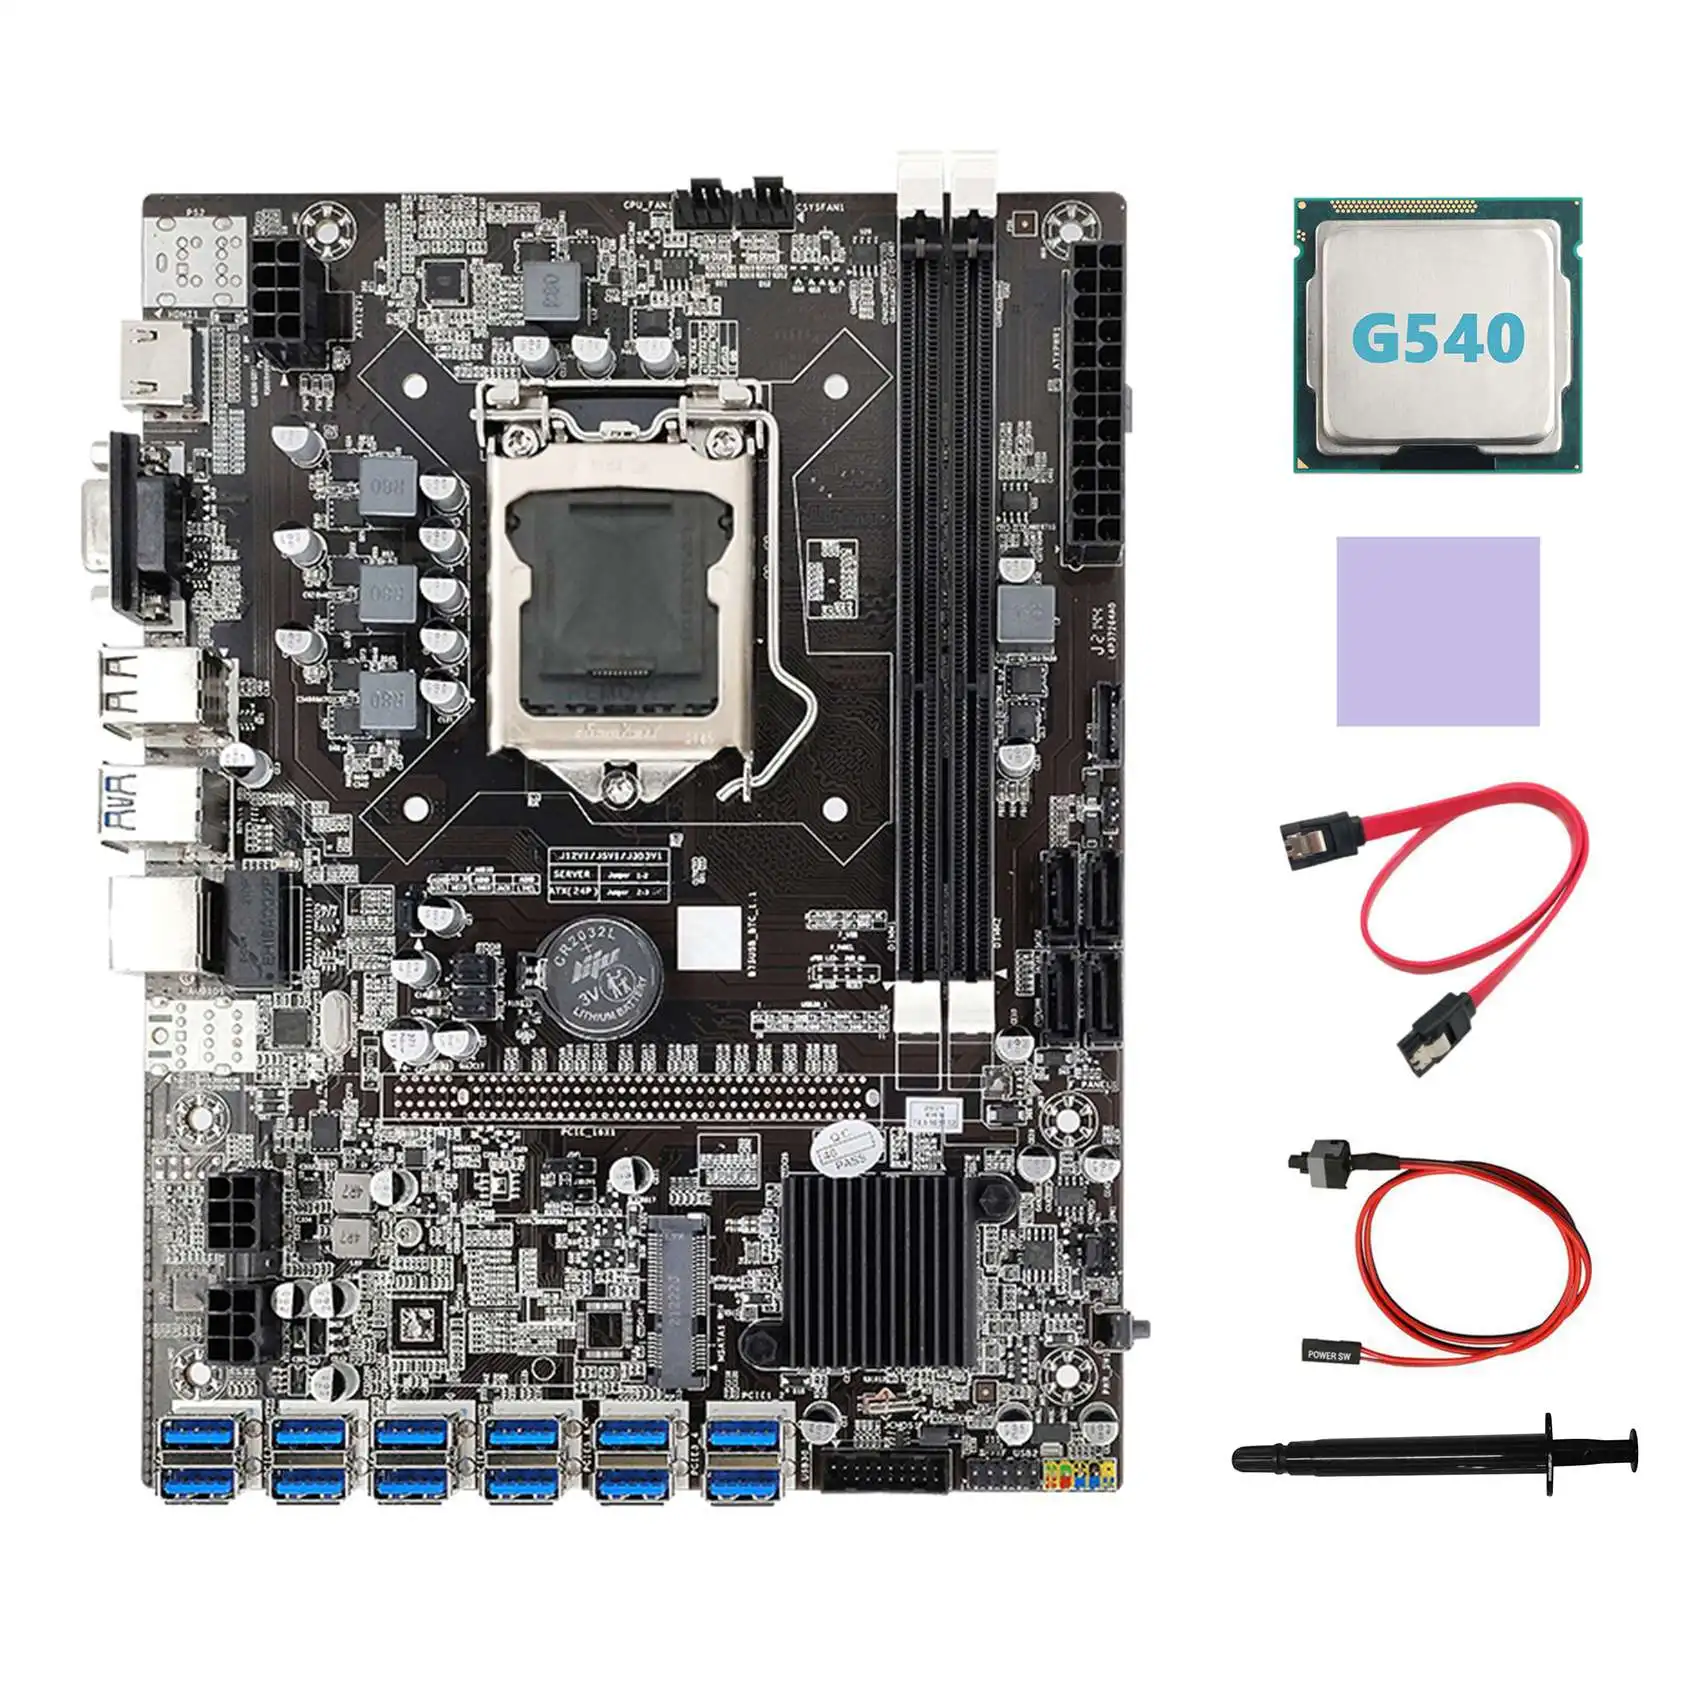 B75 ETH Miner Motherboard 12 PCIE to USB3.0+G540 CPU+Thermal Grease+Thermal Pad+SATA Cable+Switch Cable Motherboard